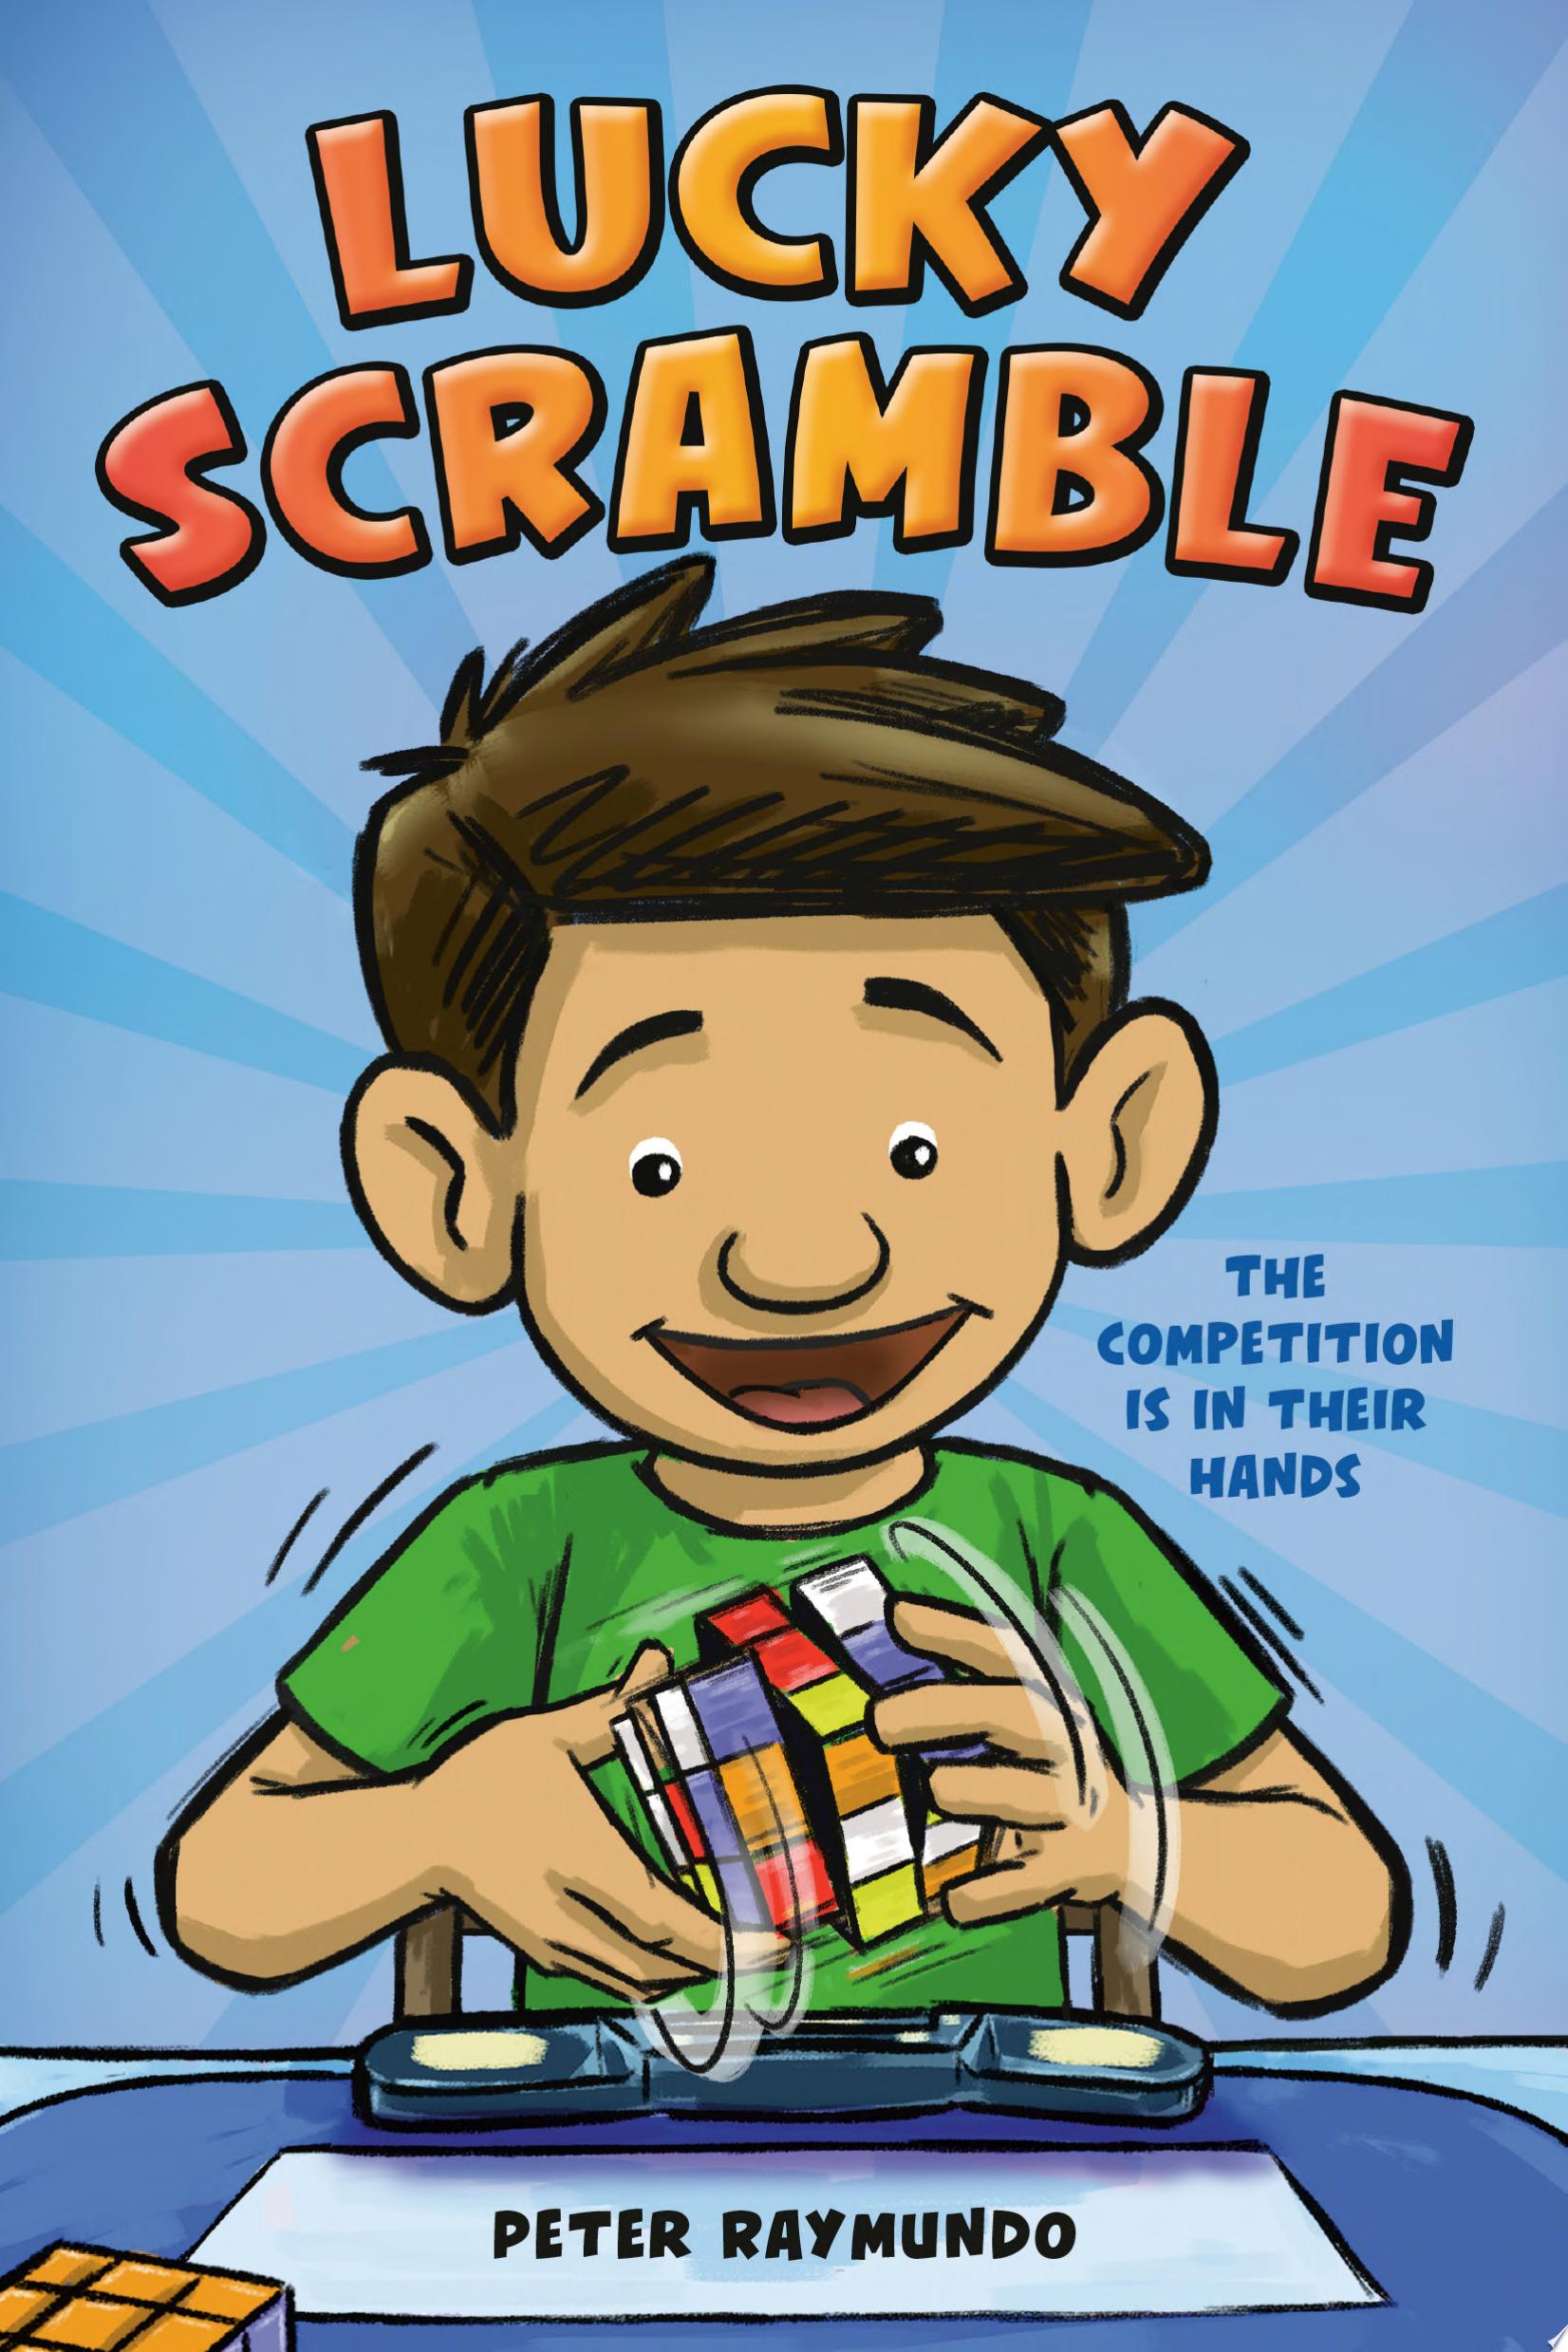 Image for "Lucky Scramble"